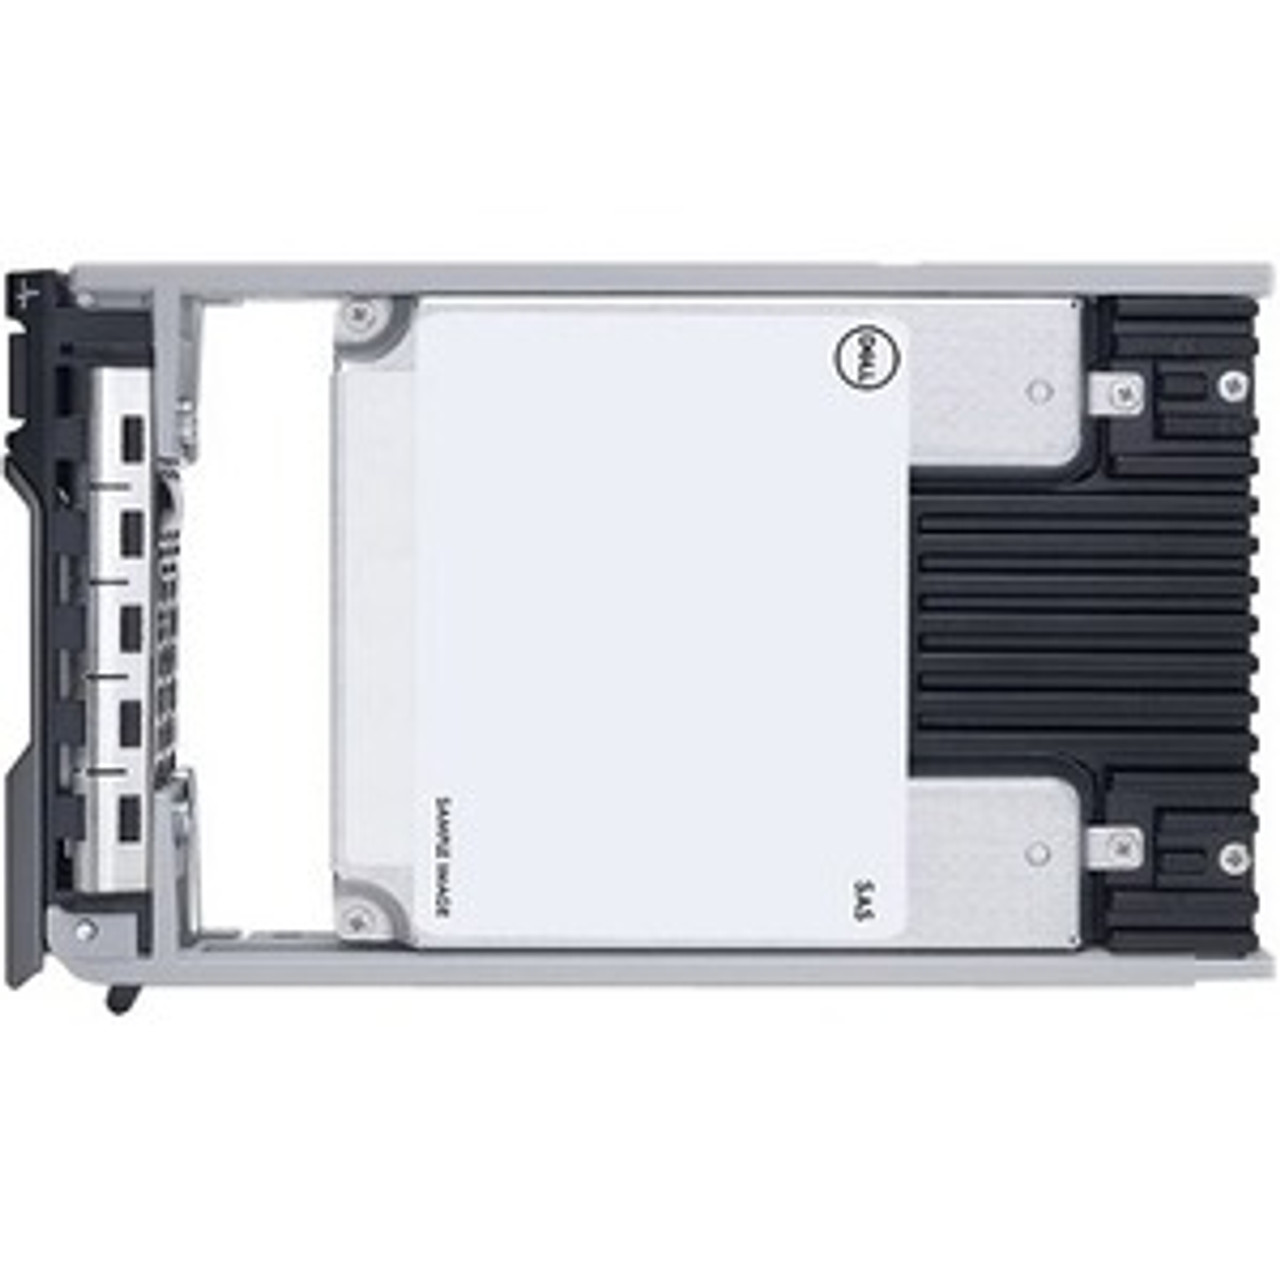 MCM2F Dell 800GB SAS 12Gbps 512e Write Intensive 2.5-inch Internal Solid State Drive (SSD)